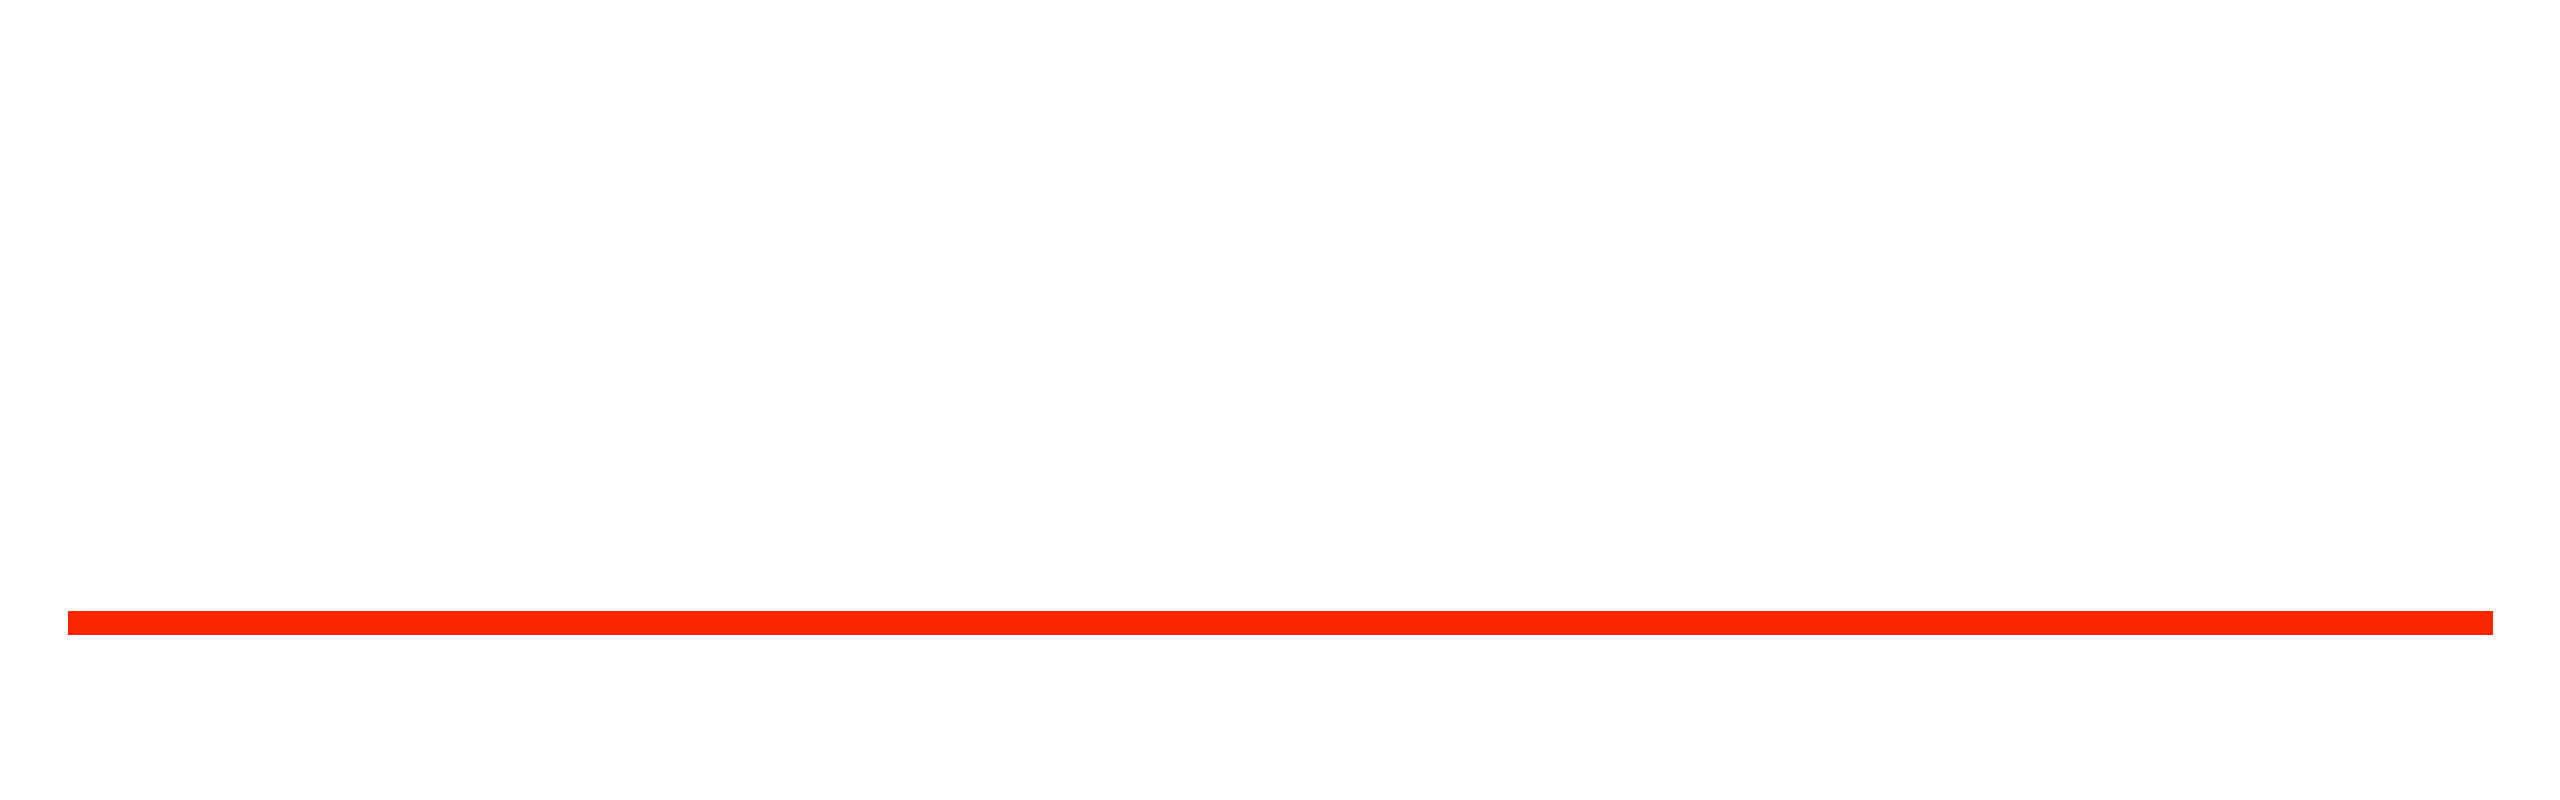 The Pit Stop icon